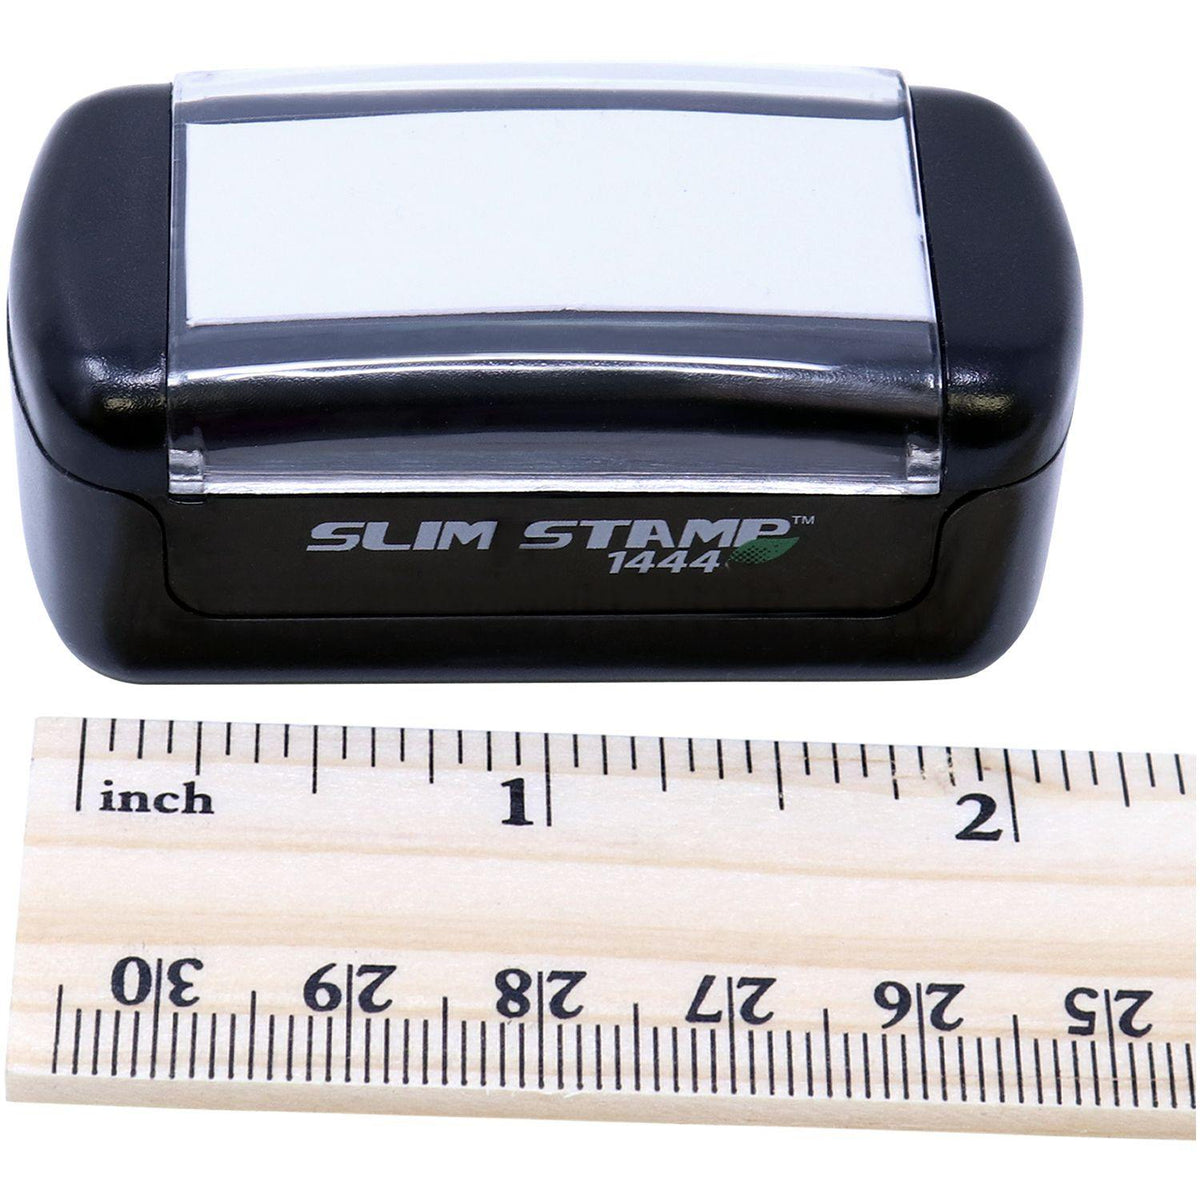 Measurement Slim Pre-Inked Received Unsealed Stamp with Ruler